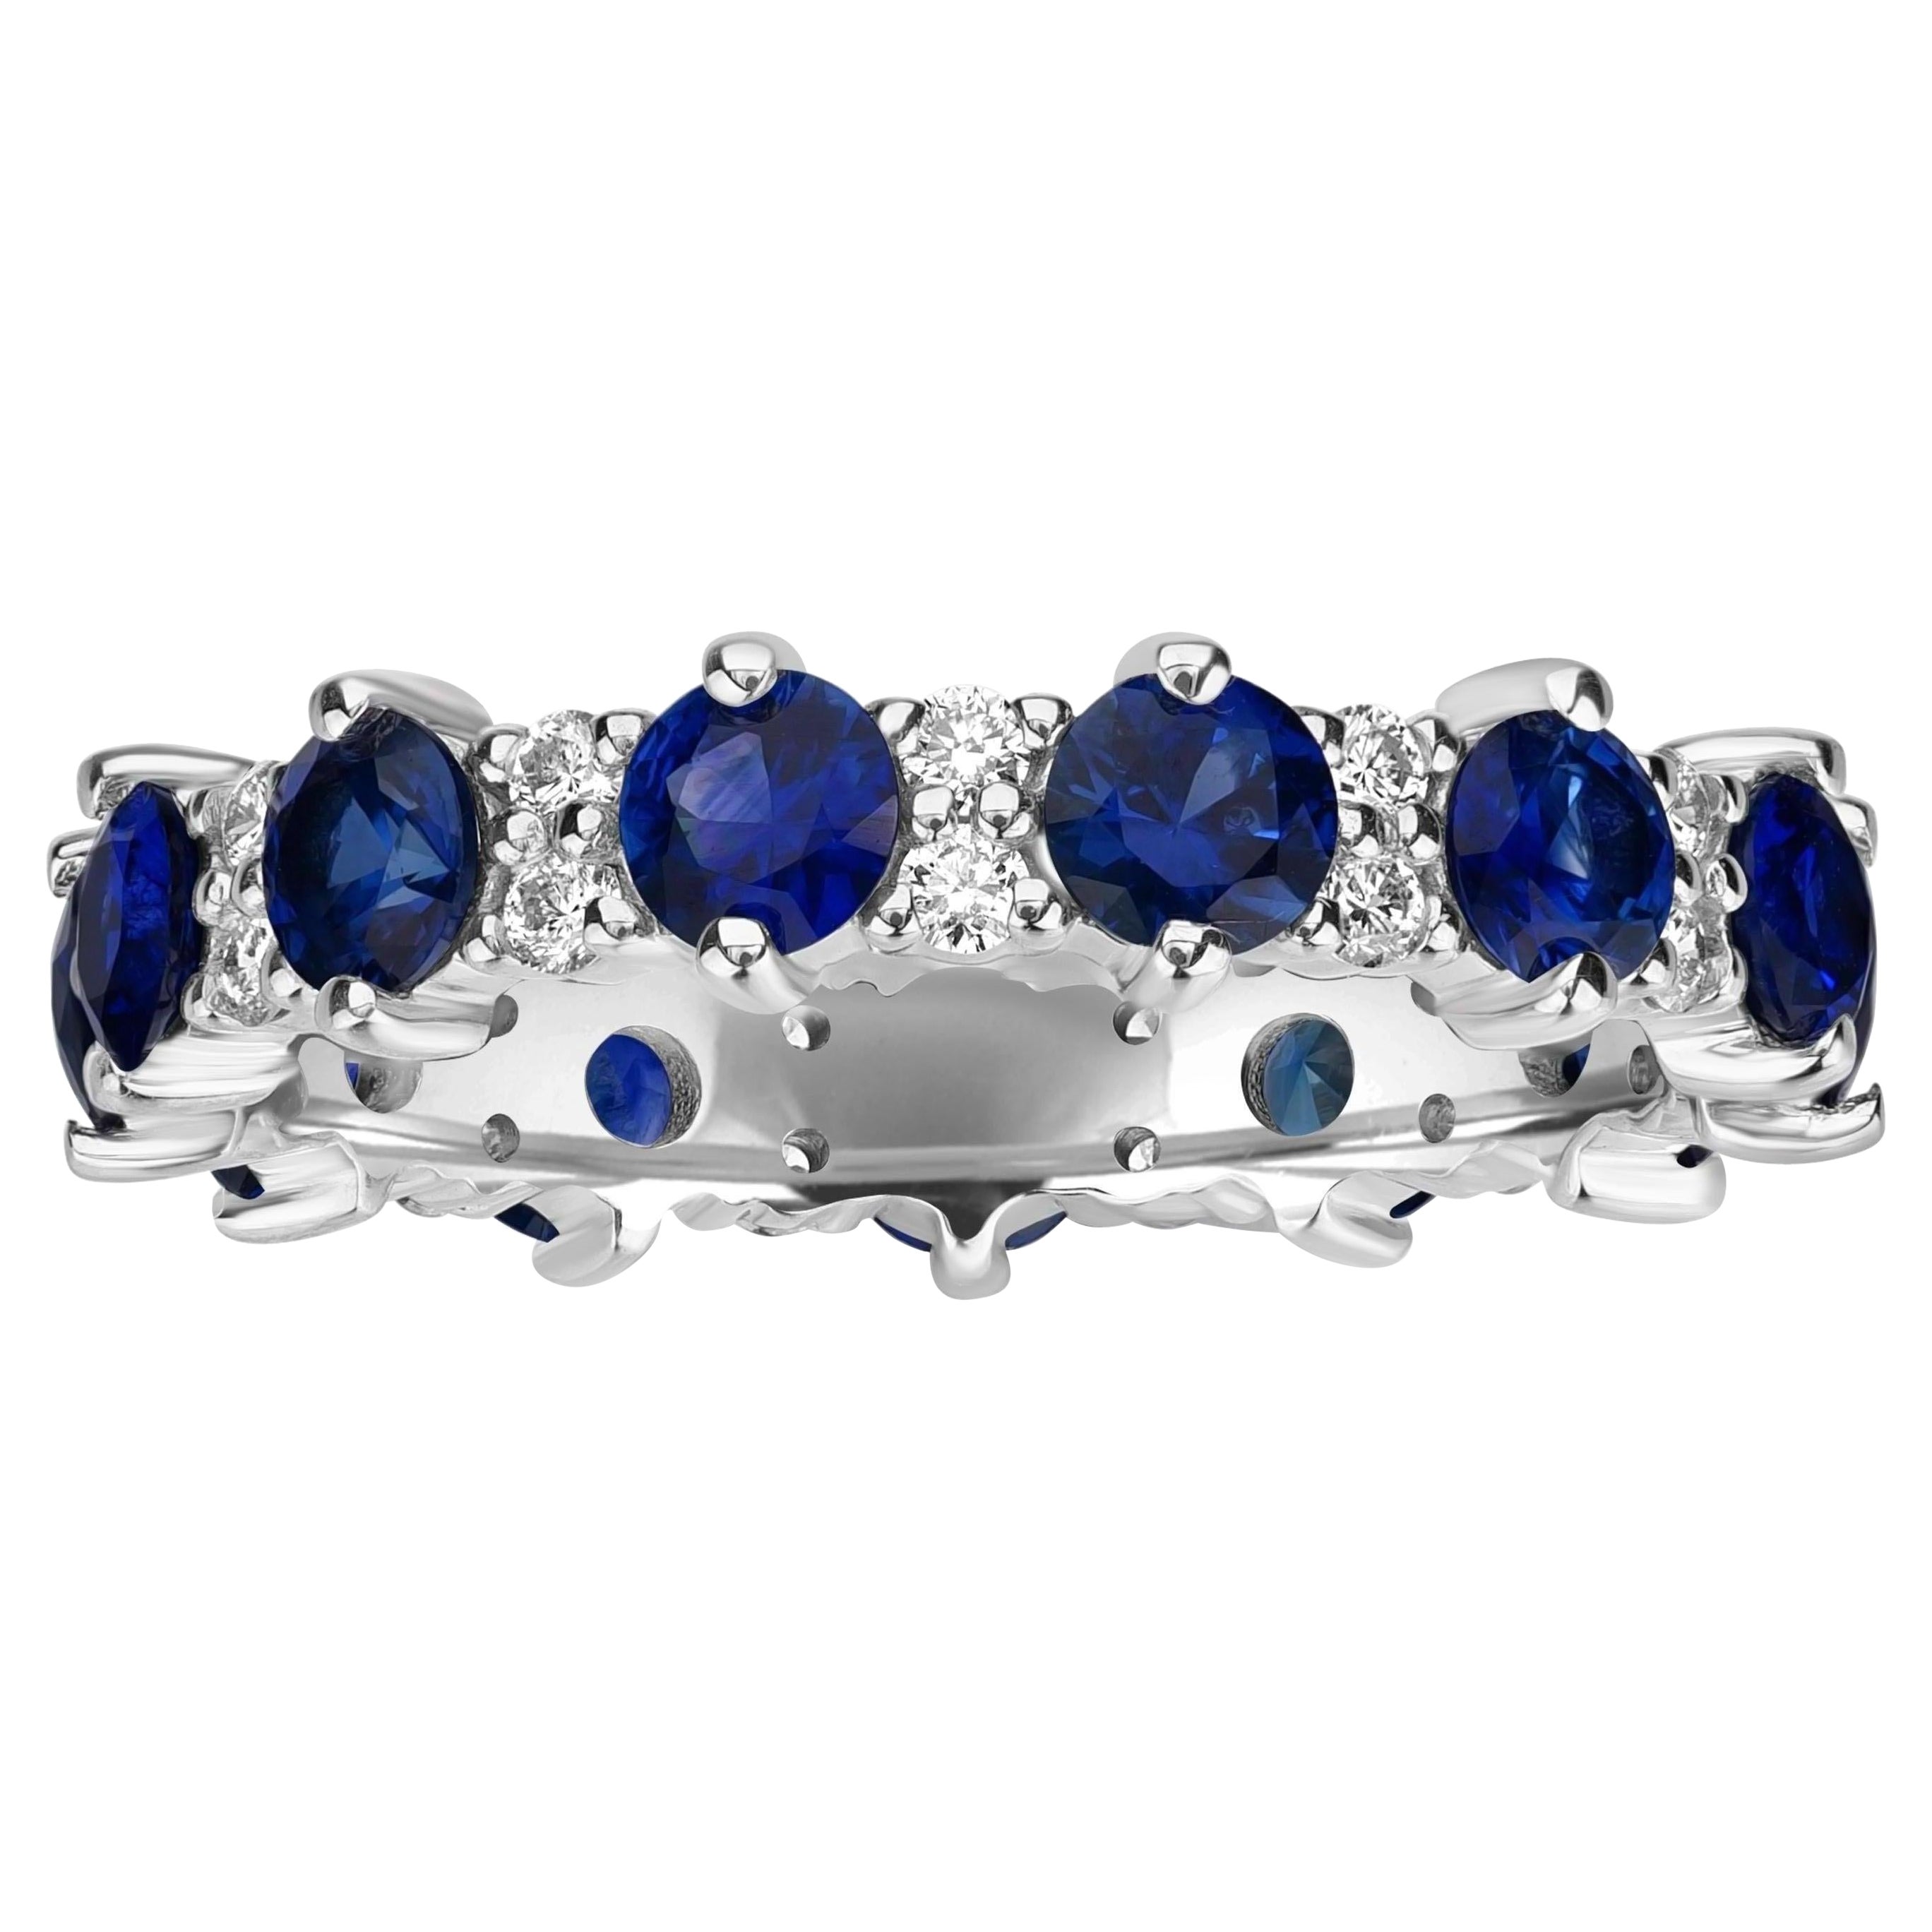 2.37 Carats Sapphire Diamond Eternity Band Ring in 18k White Gold For Sale